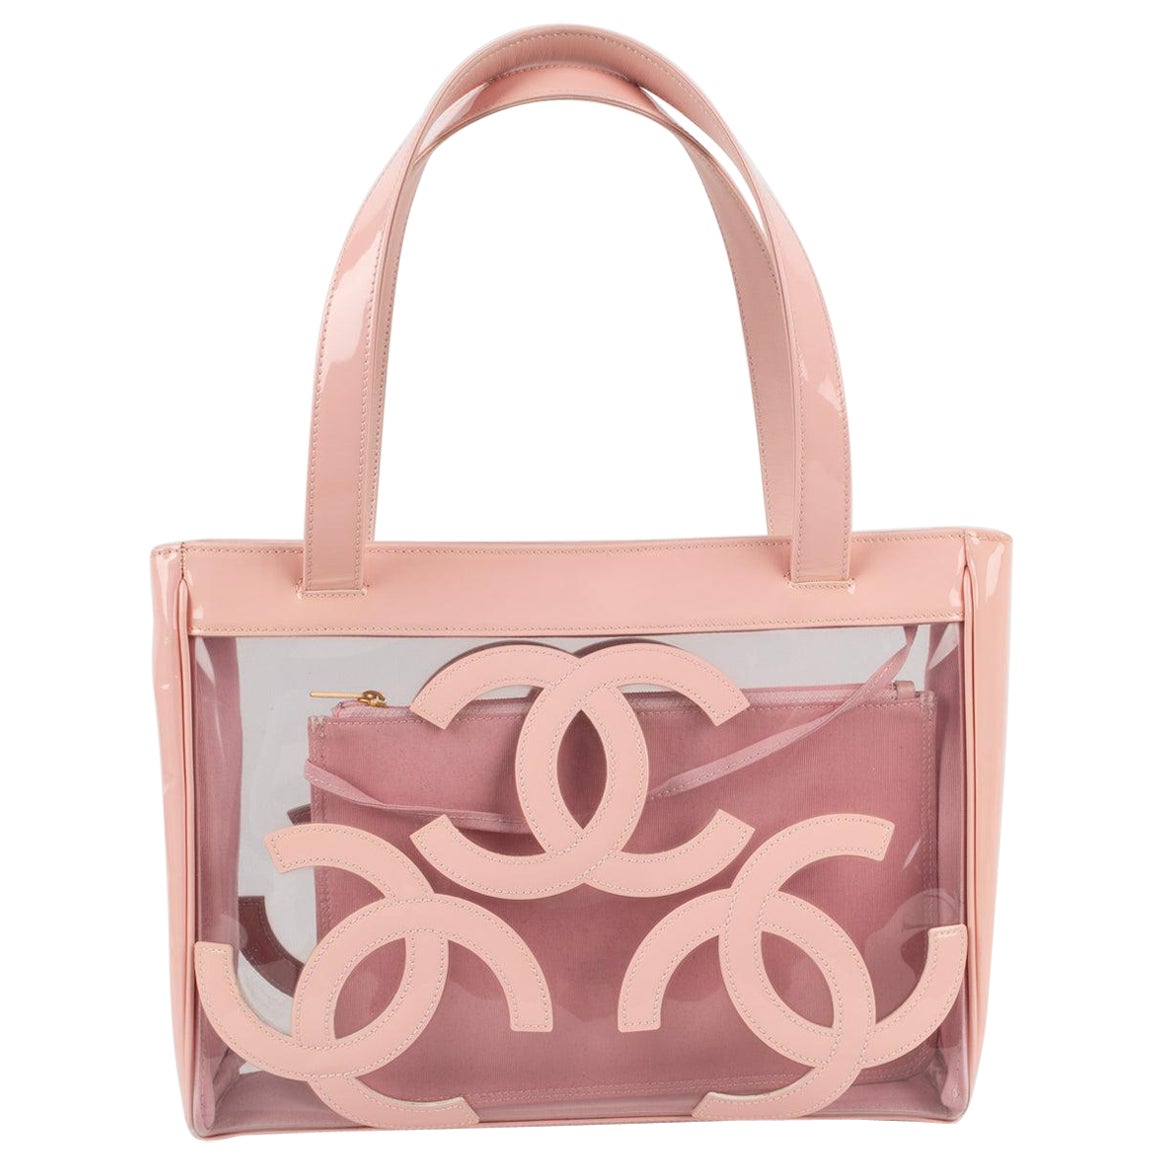 Chanel Pink Bag in Transparent Pvc Fabric and Patent Leather, 2004/2005